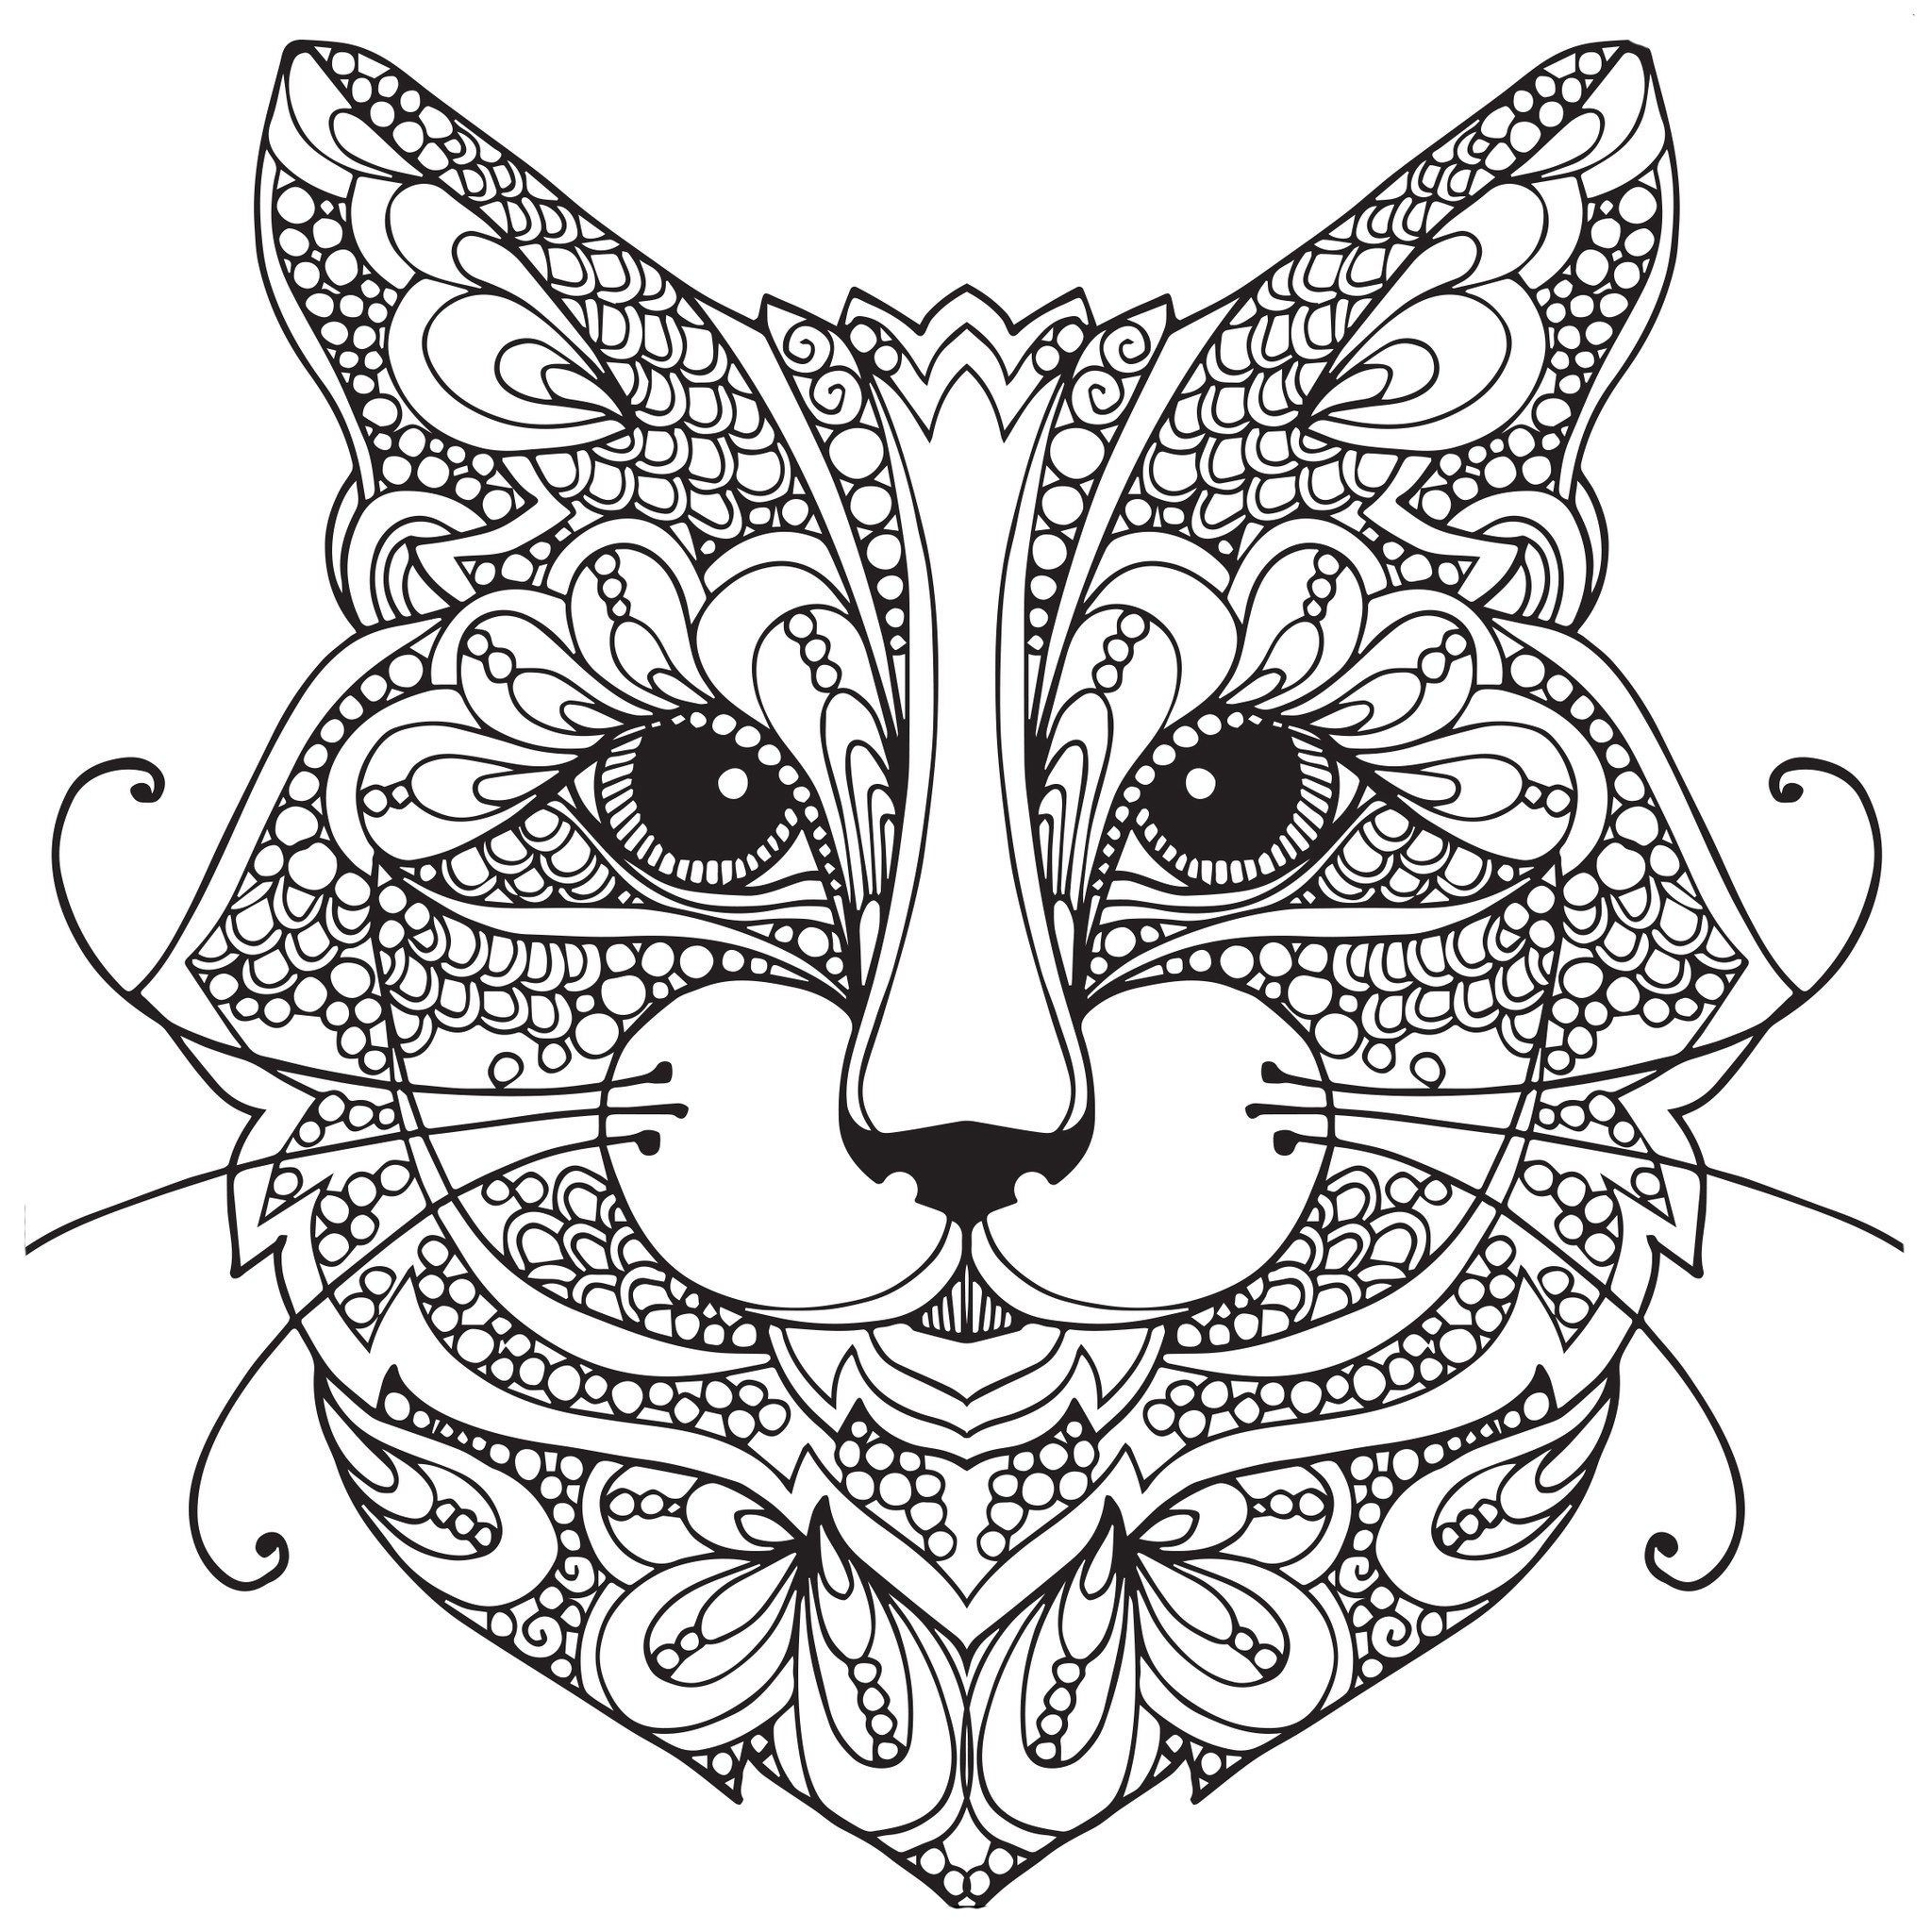 Coloring Pages For Adults Cats
 Adult Coloring Pages Cat 1 coloring pages